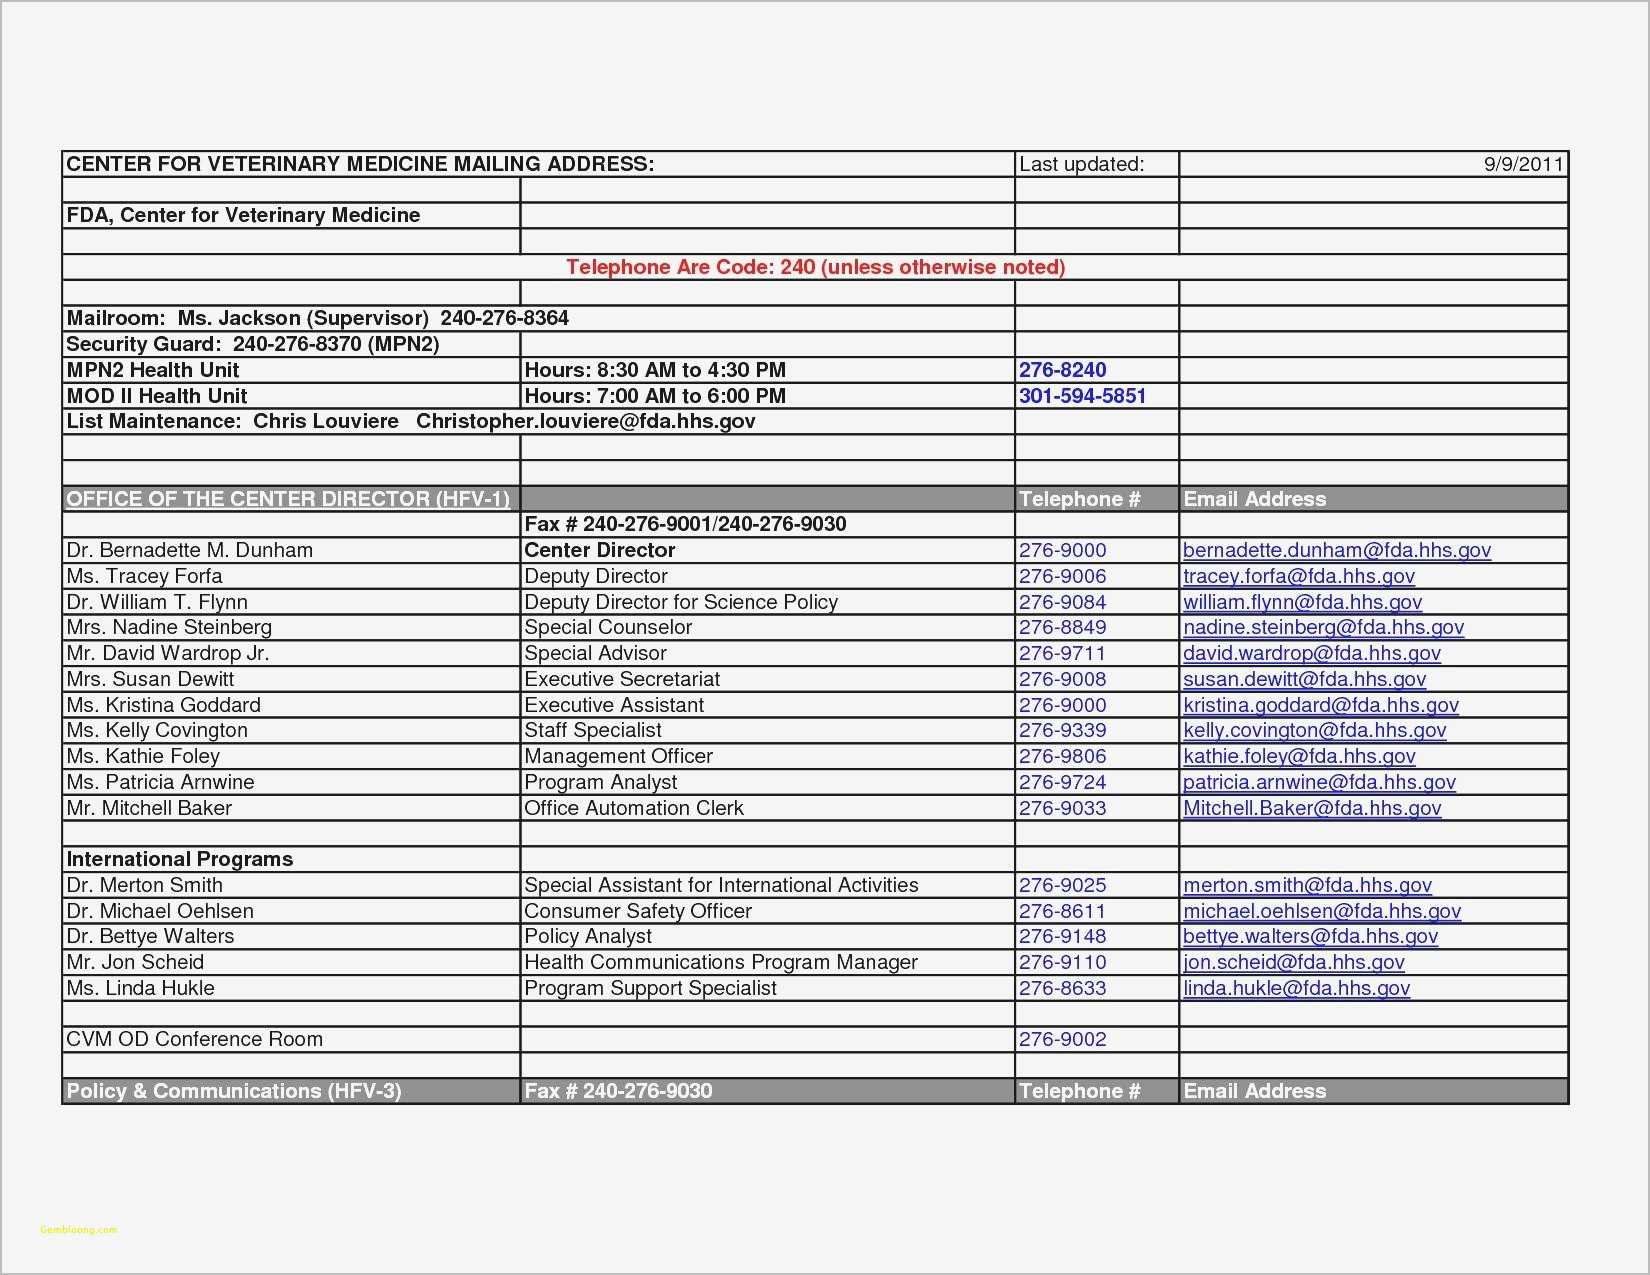 Billable Hours Spreadsheet Template Intended For Billable Hours Spreadsheet  Awal Mula